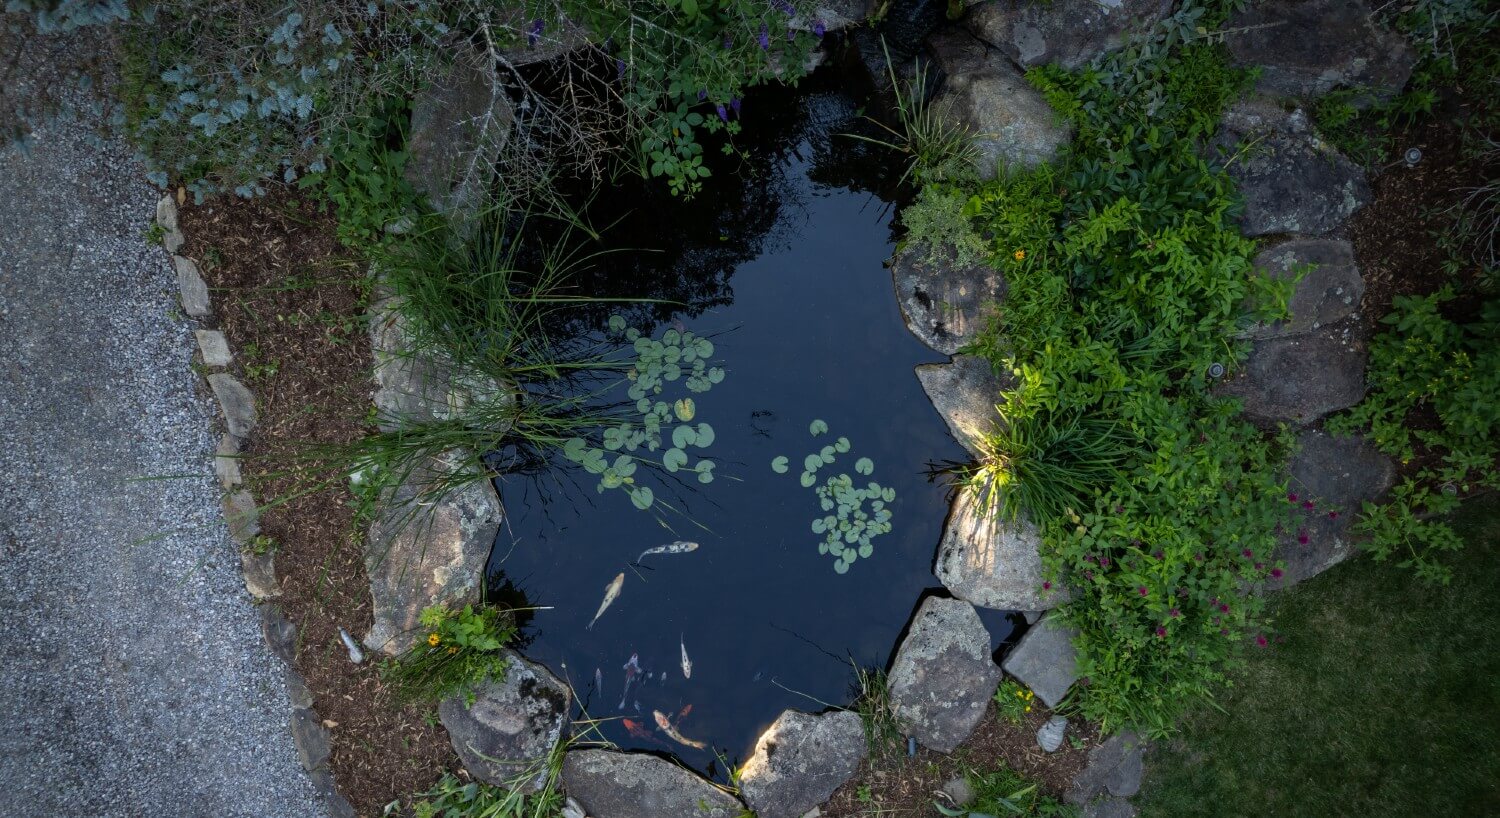 Small pond with lily pads surrounded by rocks and greenery